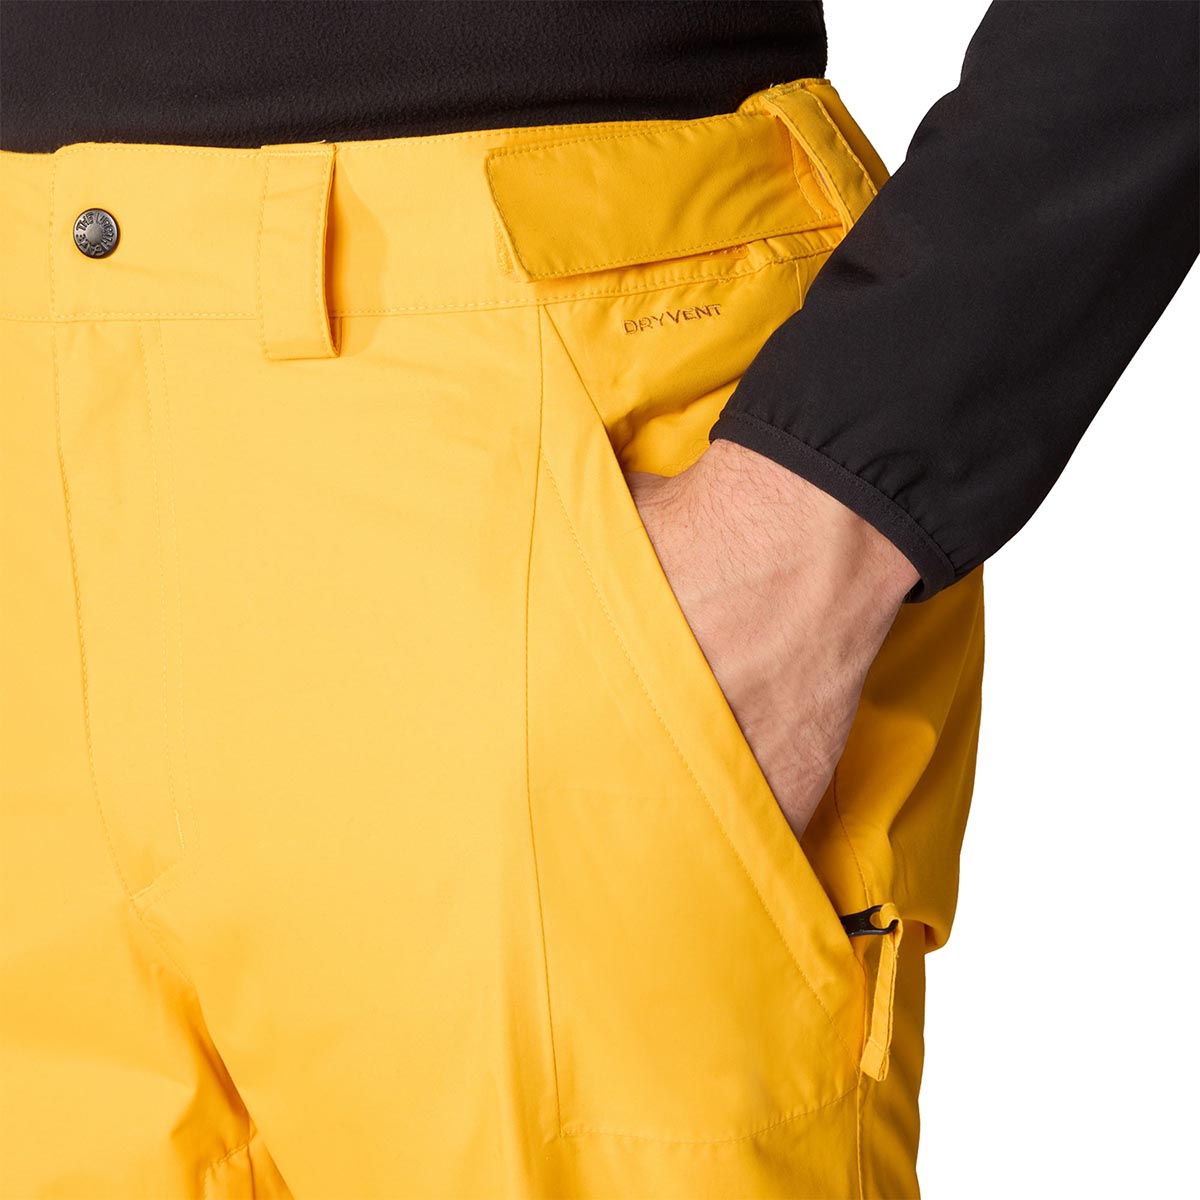 THE NORTH FACE - FREEDOM TROUSERS